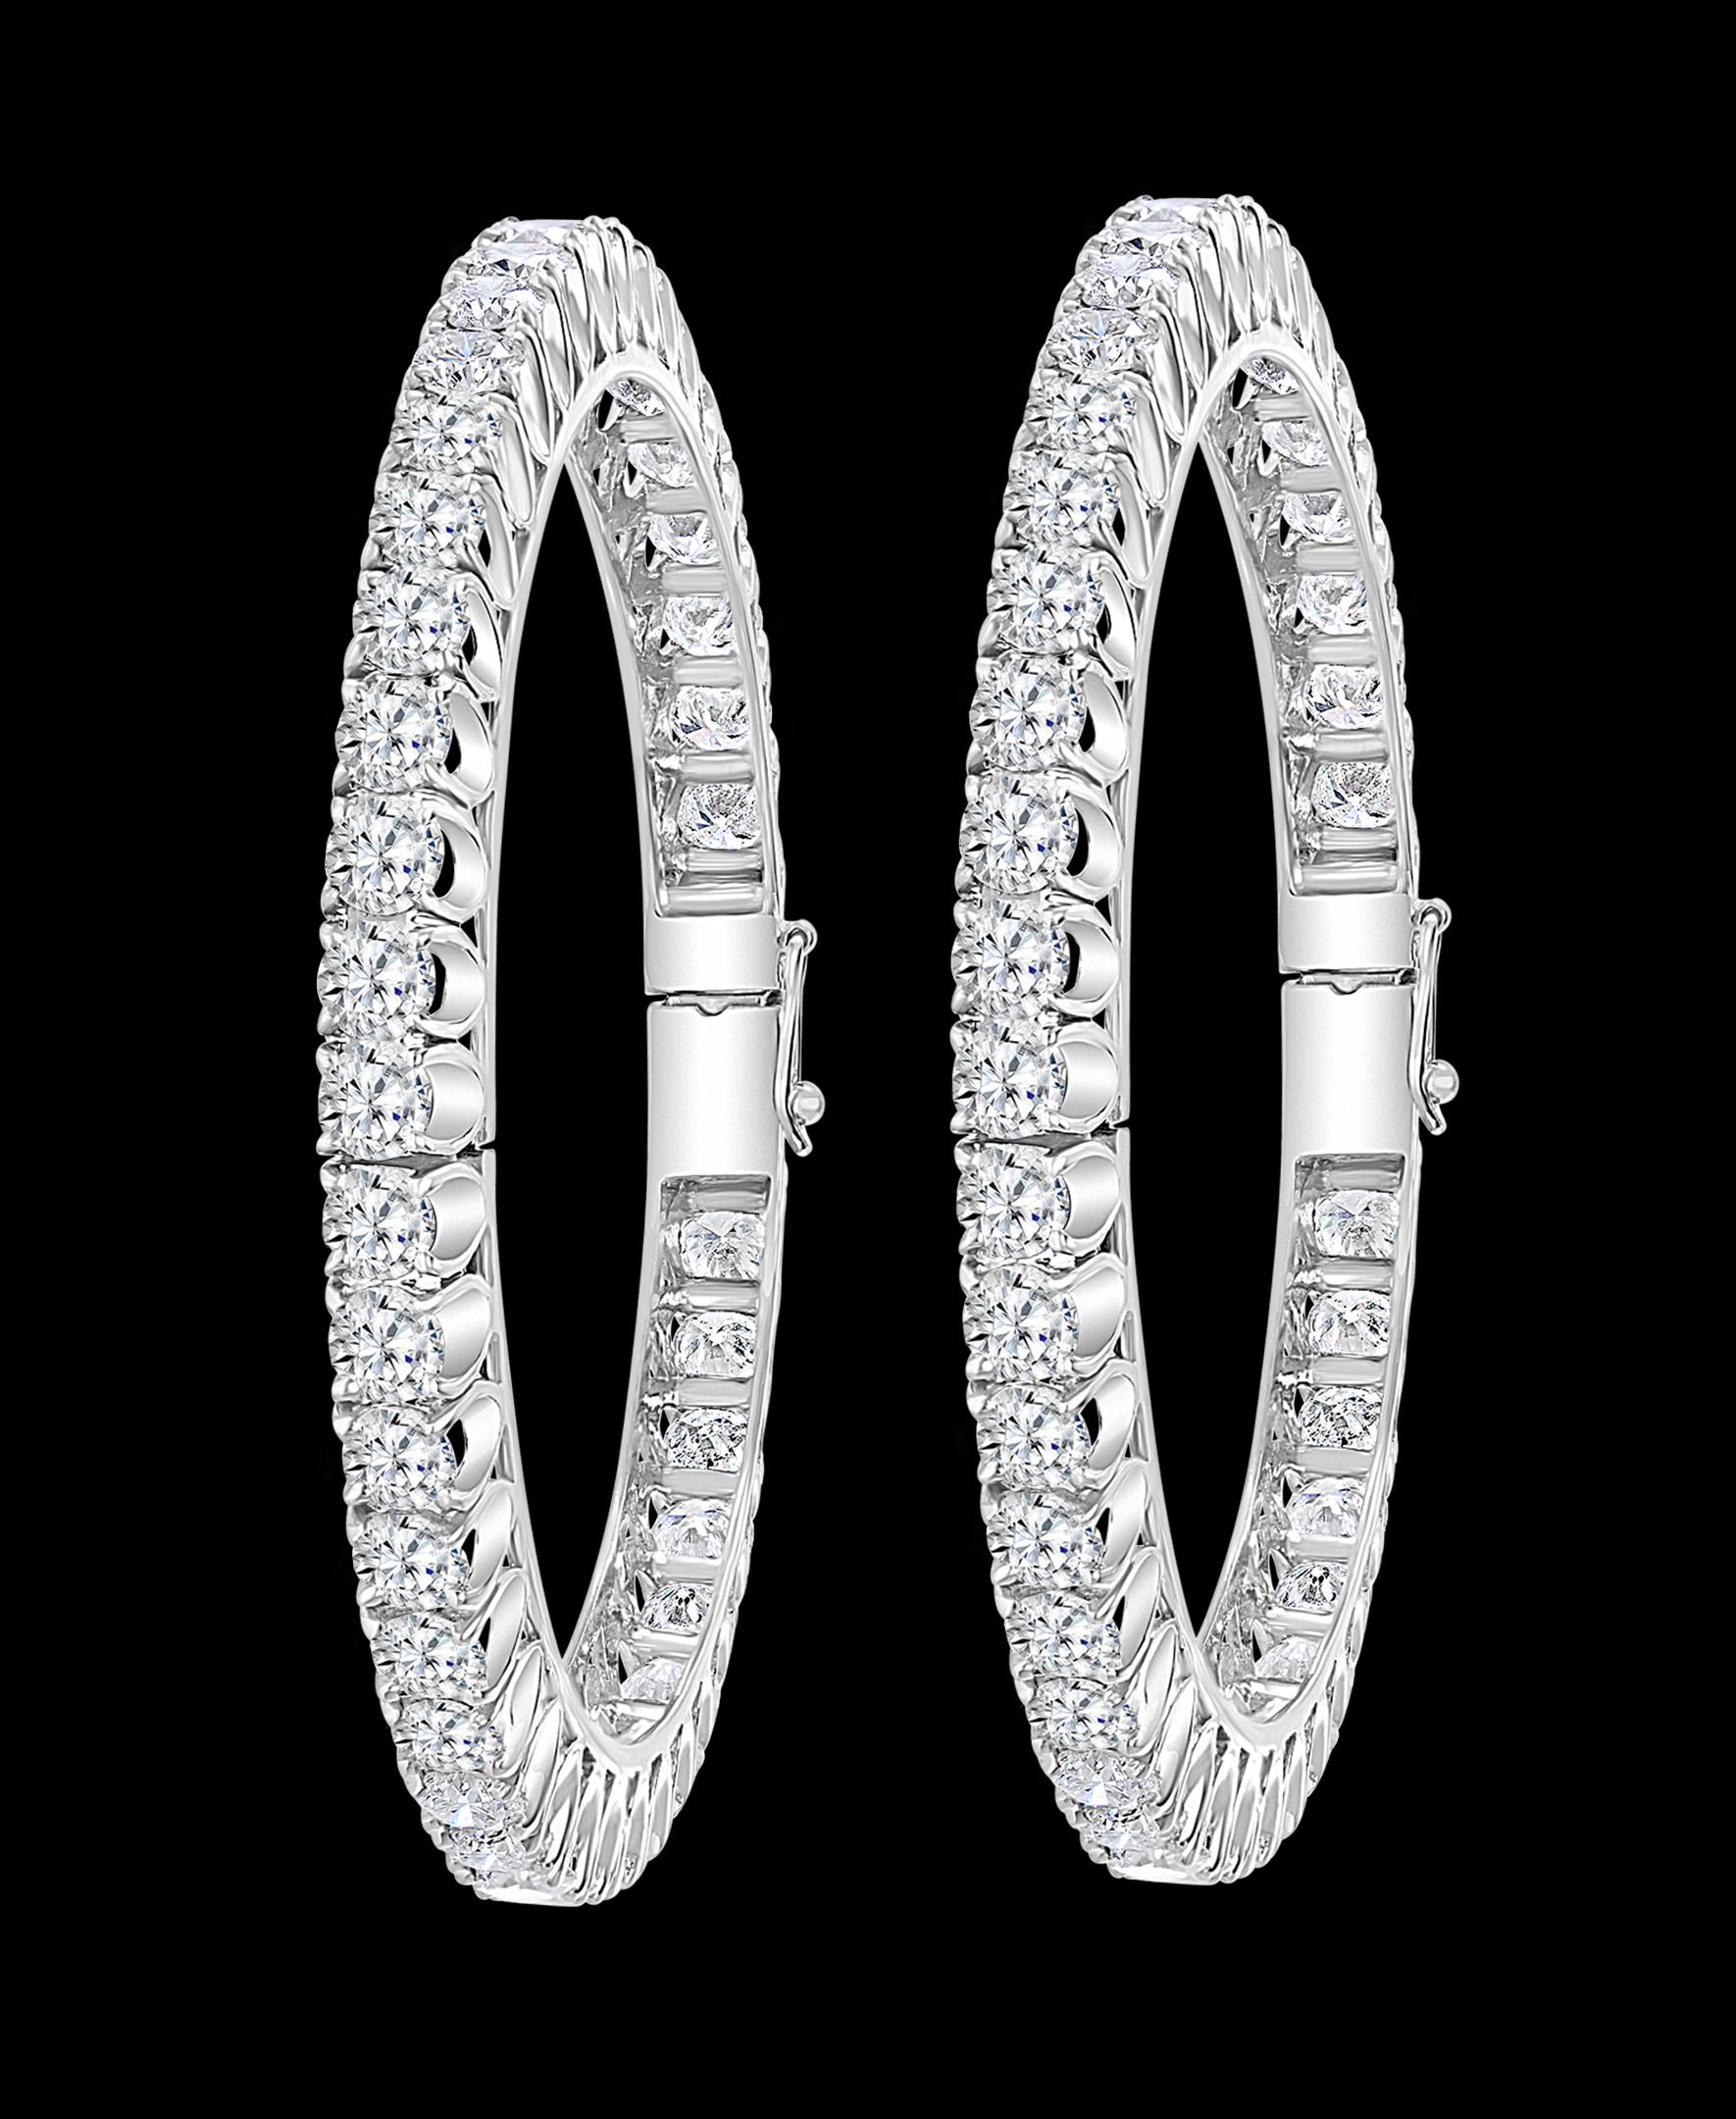 Single line 25 pointer  each , 25.26 Ct Contemporary  18 Karat  White  Gold & Diamond  Eternity Bangle Bracelet 
It features Two  bangles  crafted from  18k White gold   embedded with  25.26  Carats of  Round brilliant diamonds in two bangles . 
The